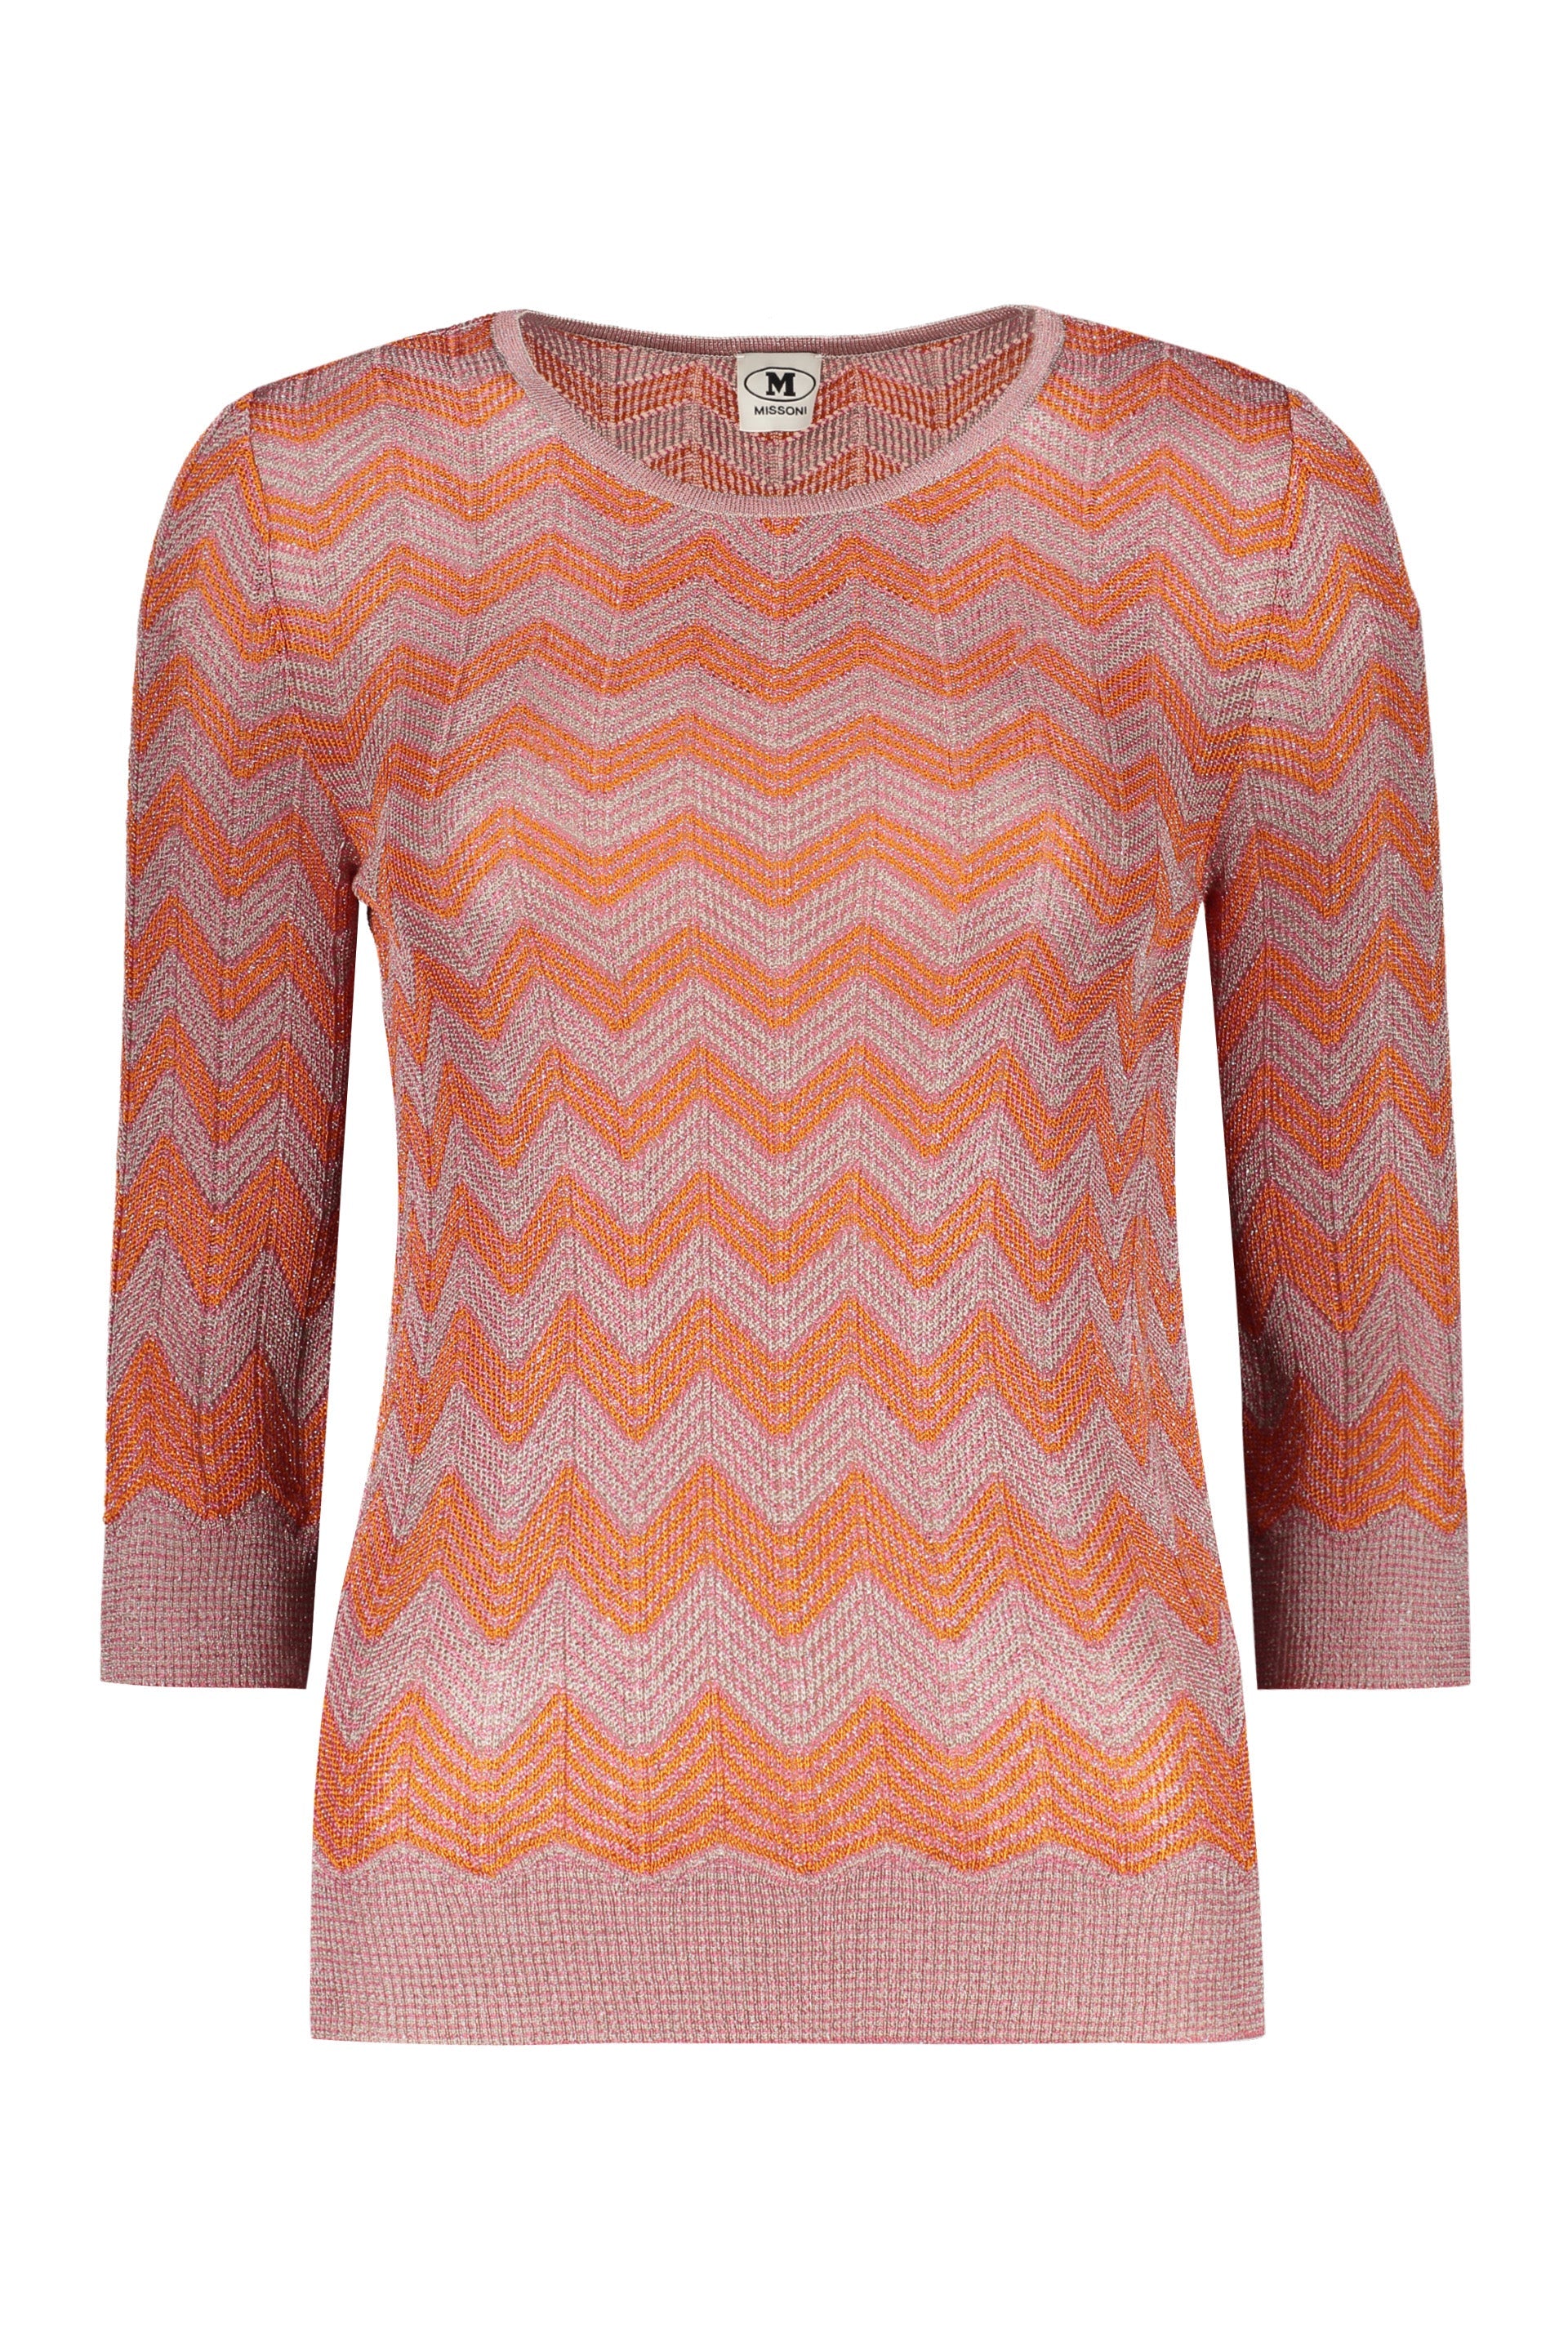 Missoni-OUTLET-SALE-Knitted-top-Shirts-L-ARCHIVE-COLLECTION_291cc80e-a0e3-45e6-bd86-a9b304727dd6.jpg